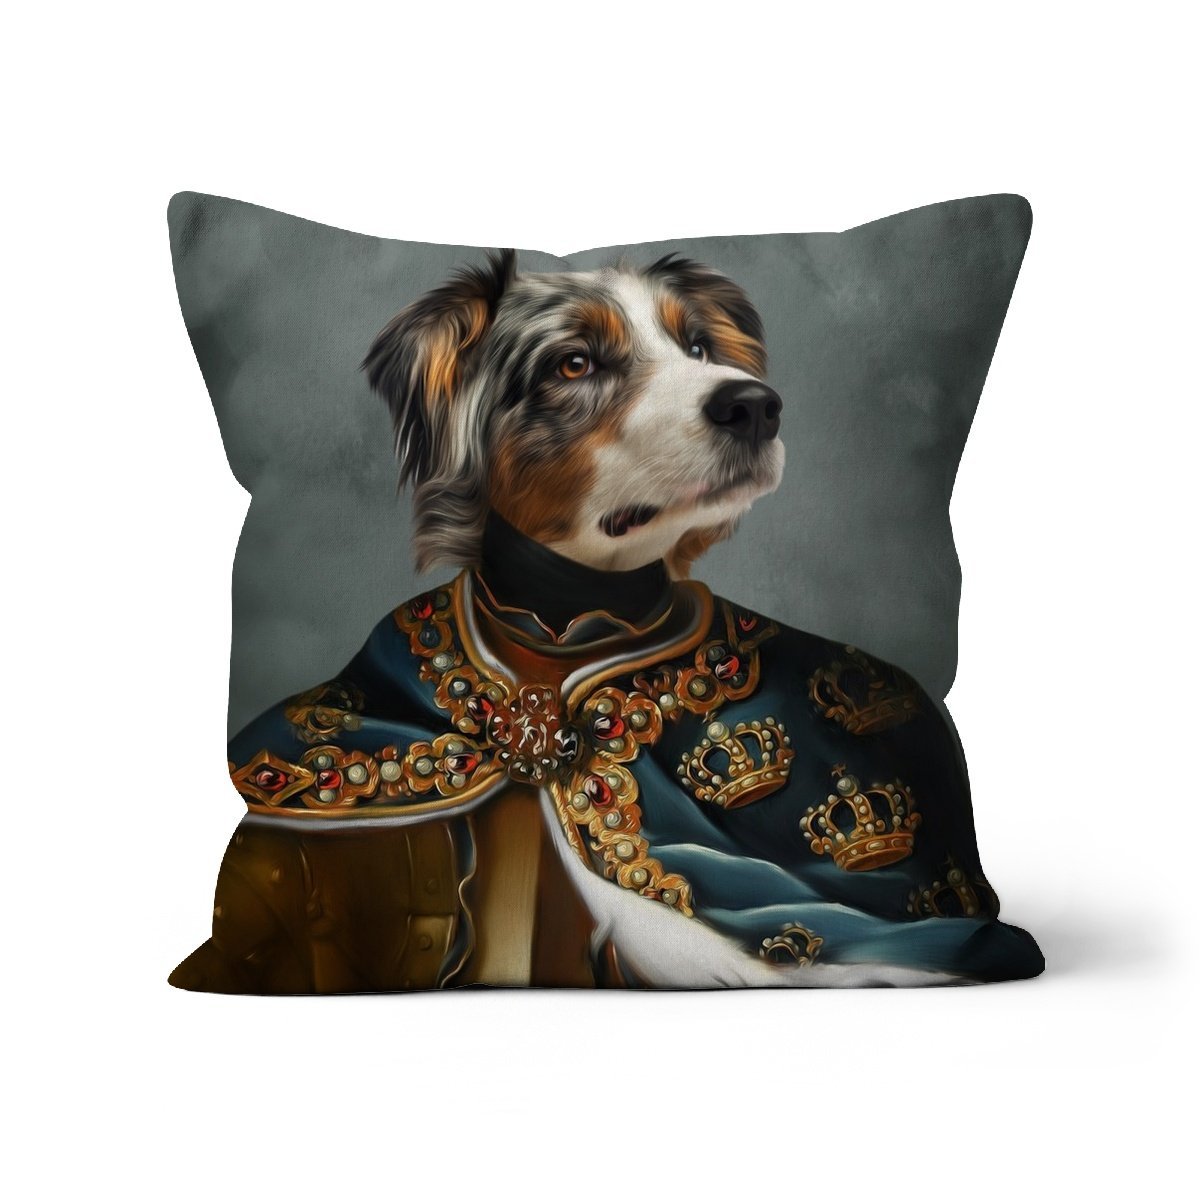 The Royal Knight: Custom Pet Throw Pillow - Paw & Glory - #pet portraits# - #dog portraits# - #pet portraits uk#paw & glory, custom pet portrait pillow,pet face pillow, custom cat pillows, pet pillow, custom pillow of pet, personalised cat pillow